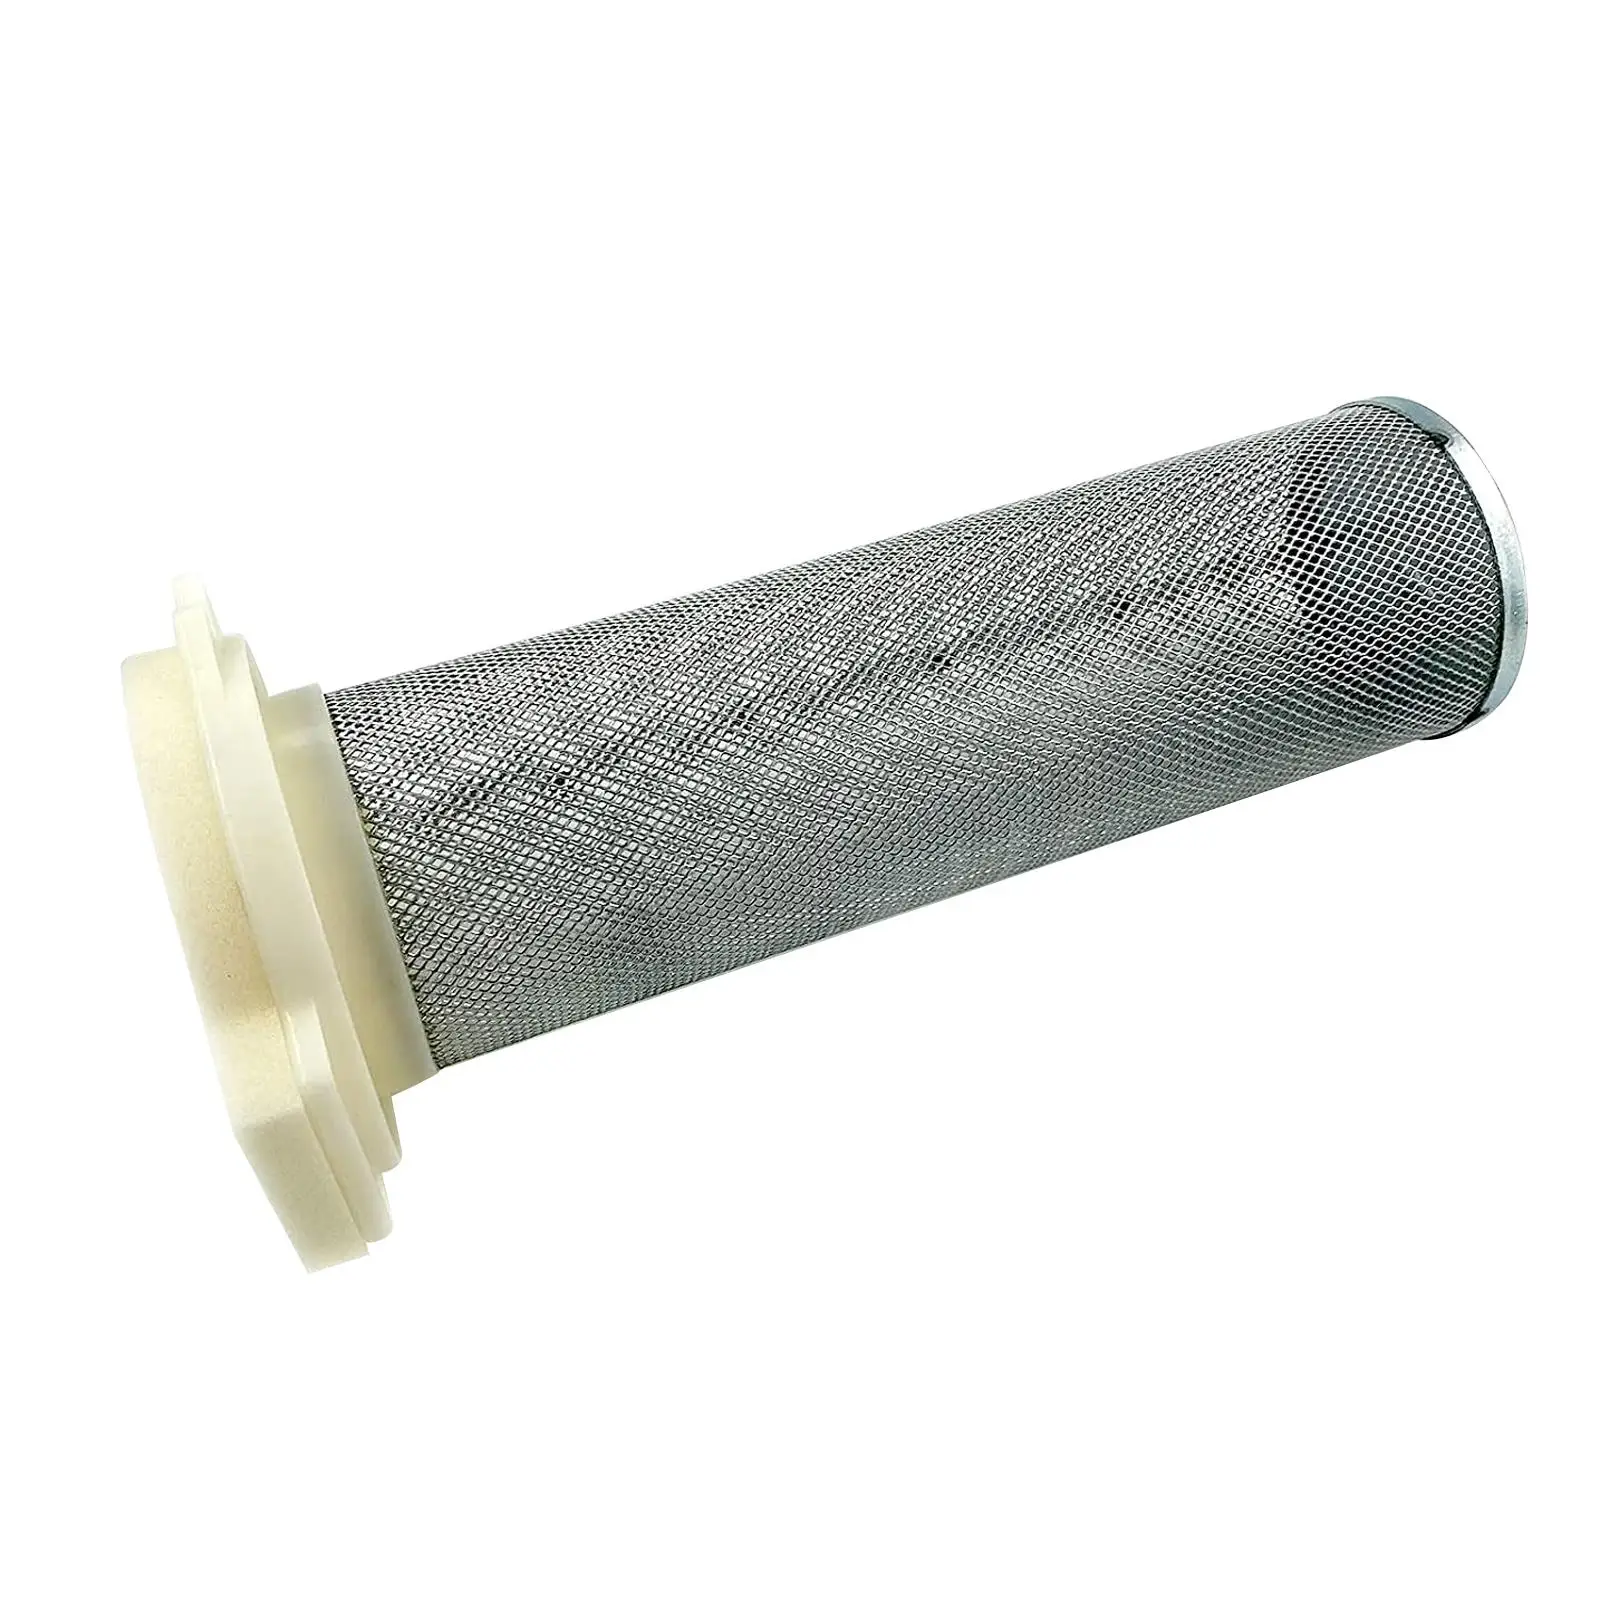 Air Filter Cage 1Uy-14458-01-00 for Yamaha Yfm 350 Spare Parts Replacement